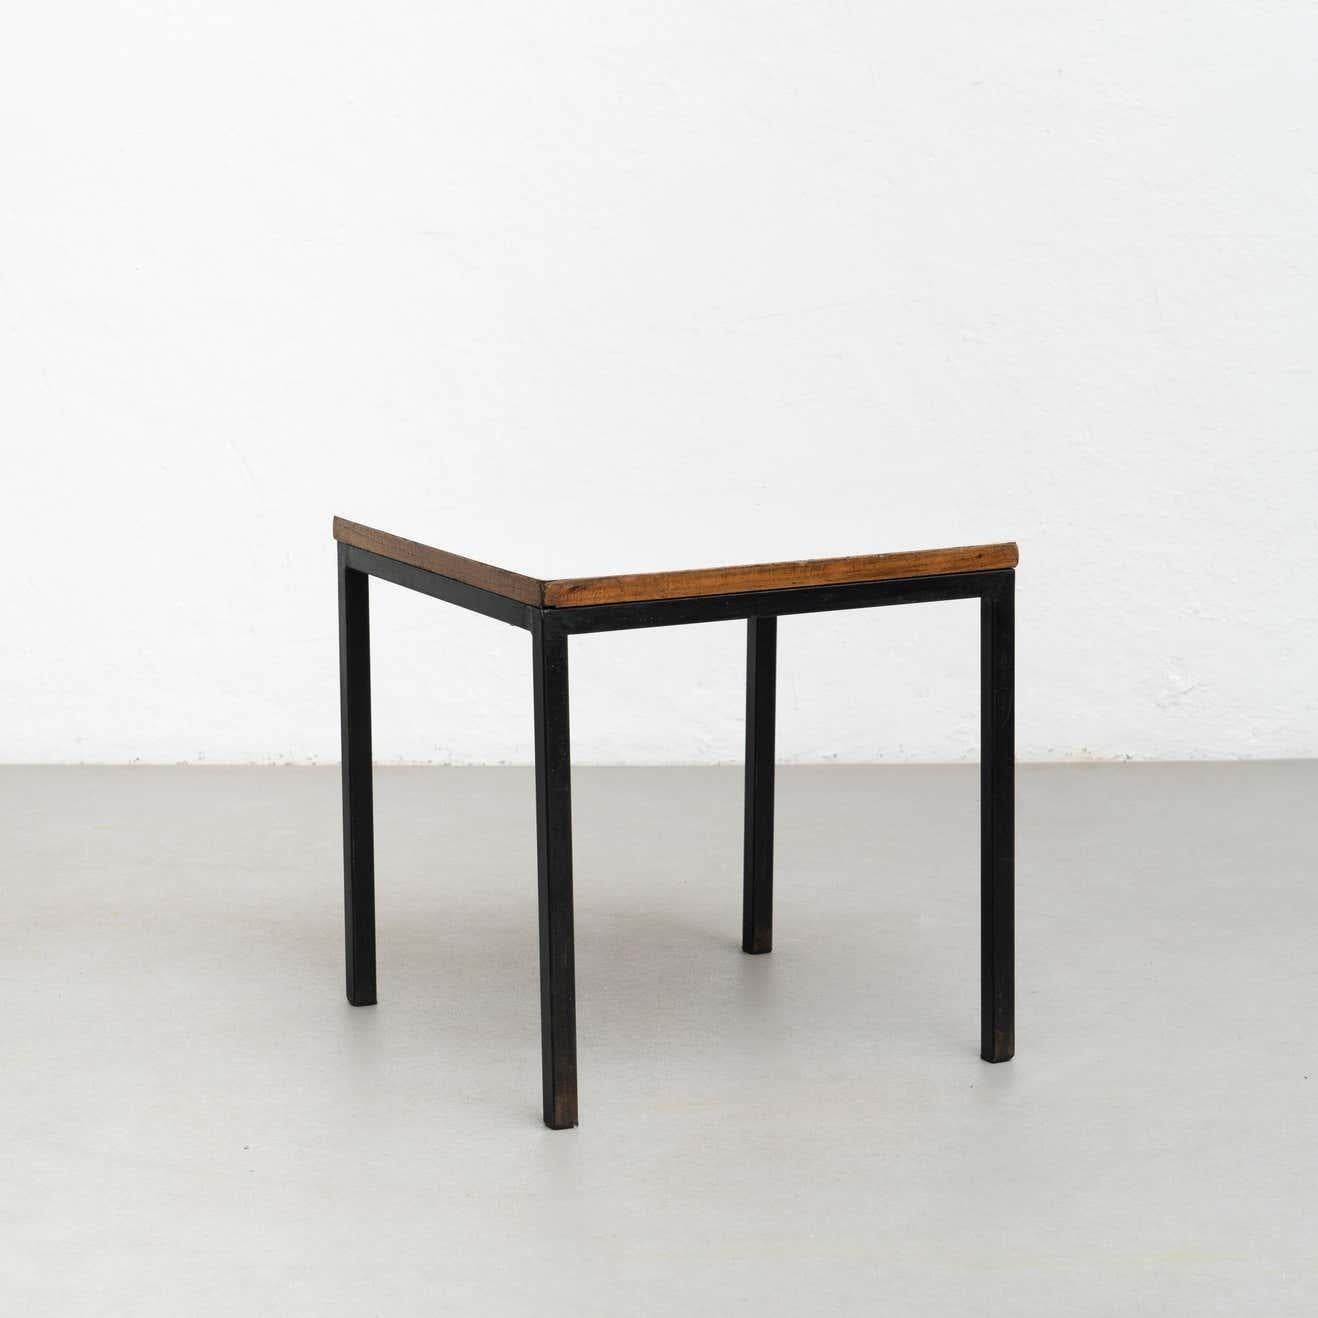 Mid-Century Modern Charlotte Perriand Metal, Wood and Formica Table for Cansado, circa 1950 For Sale